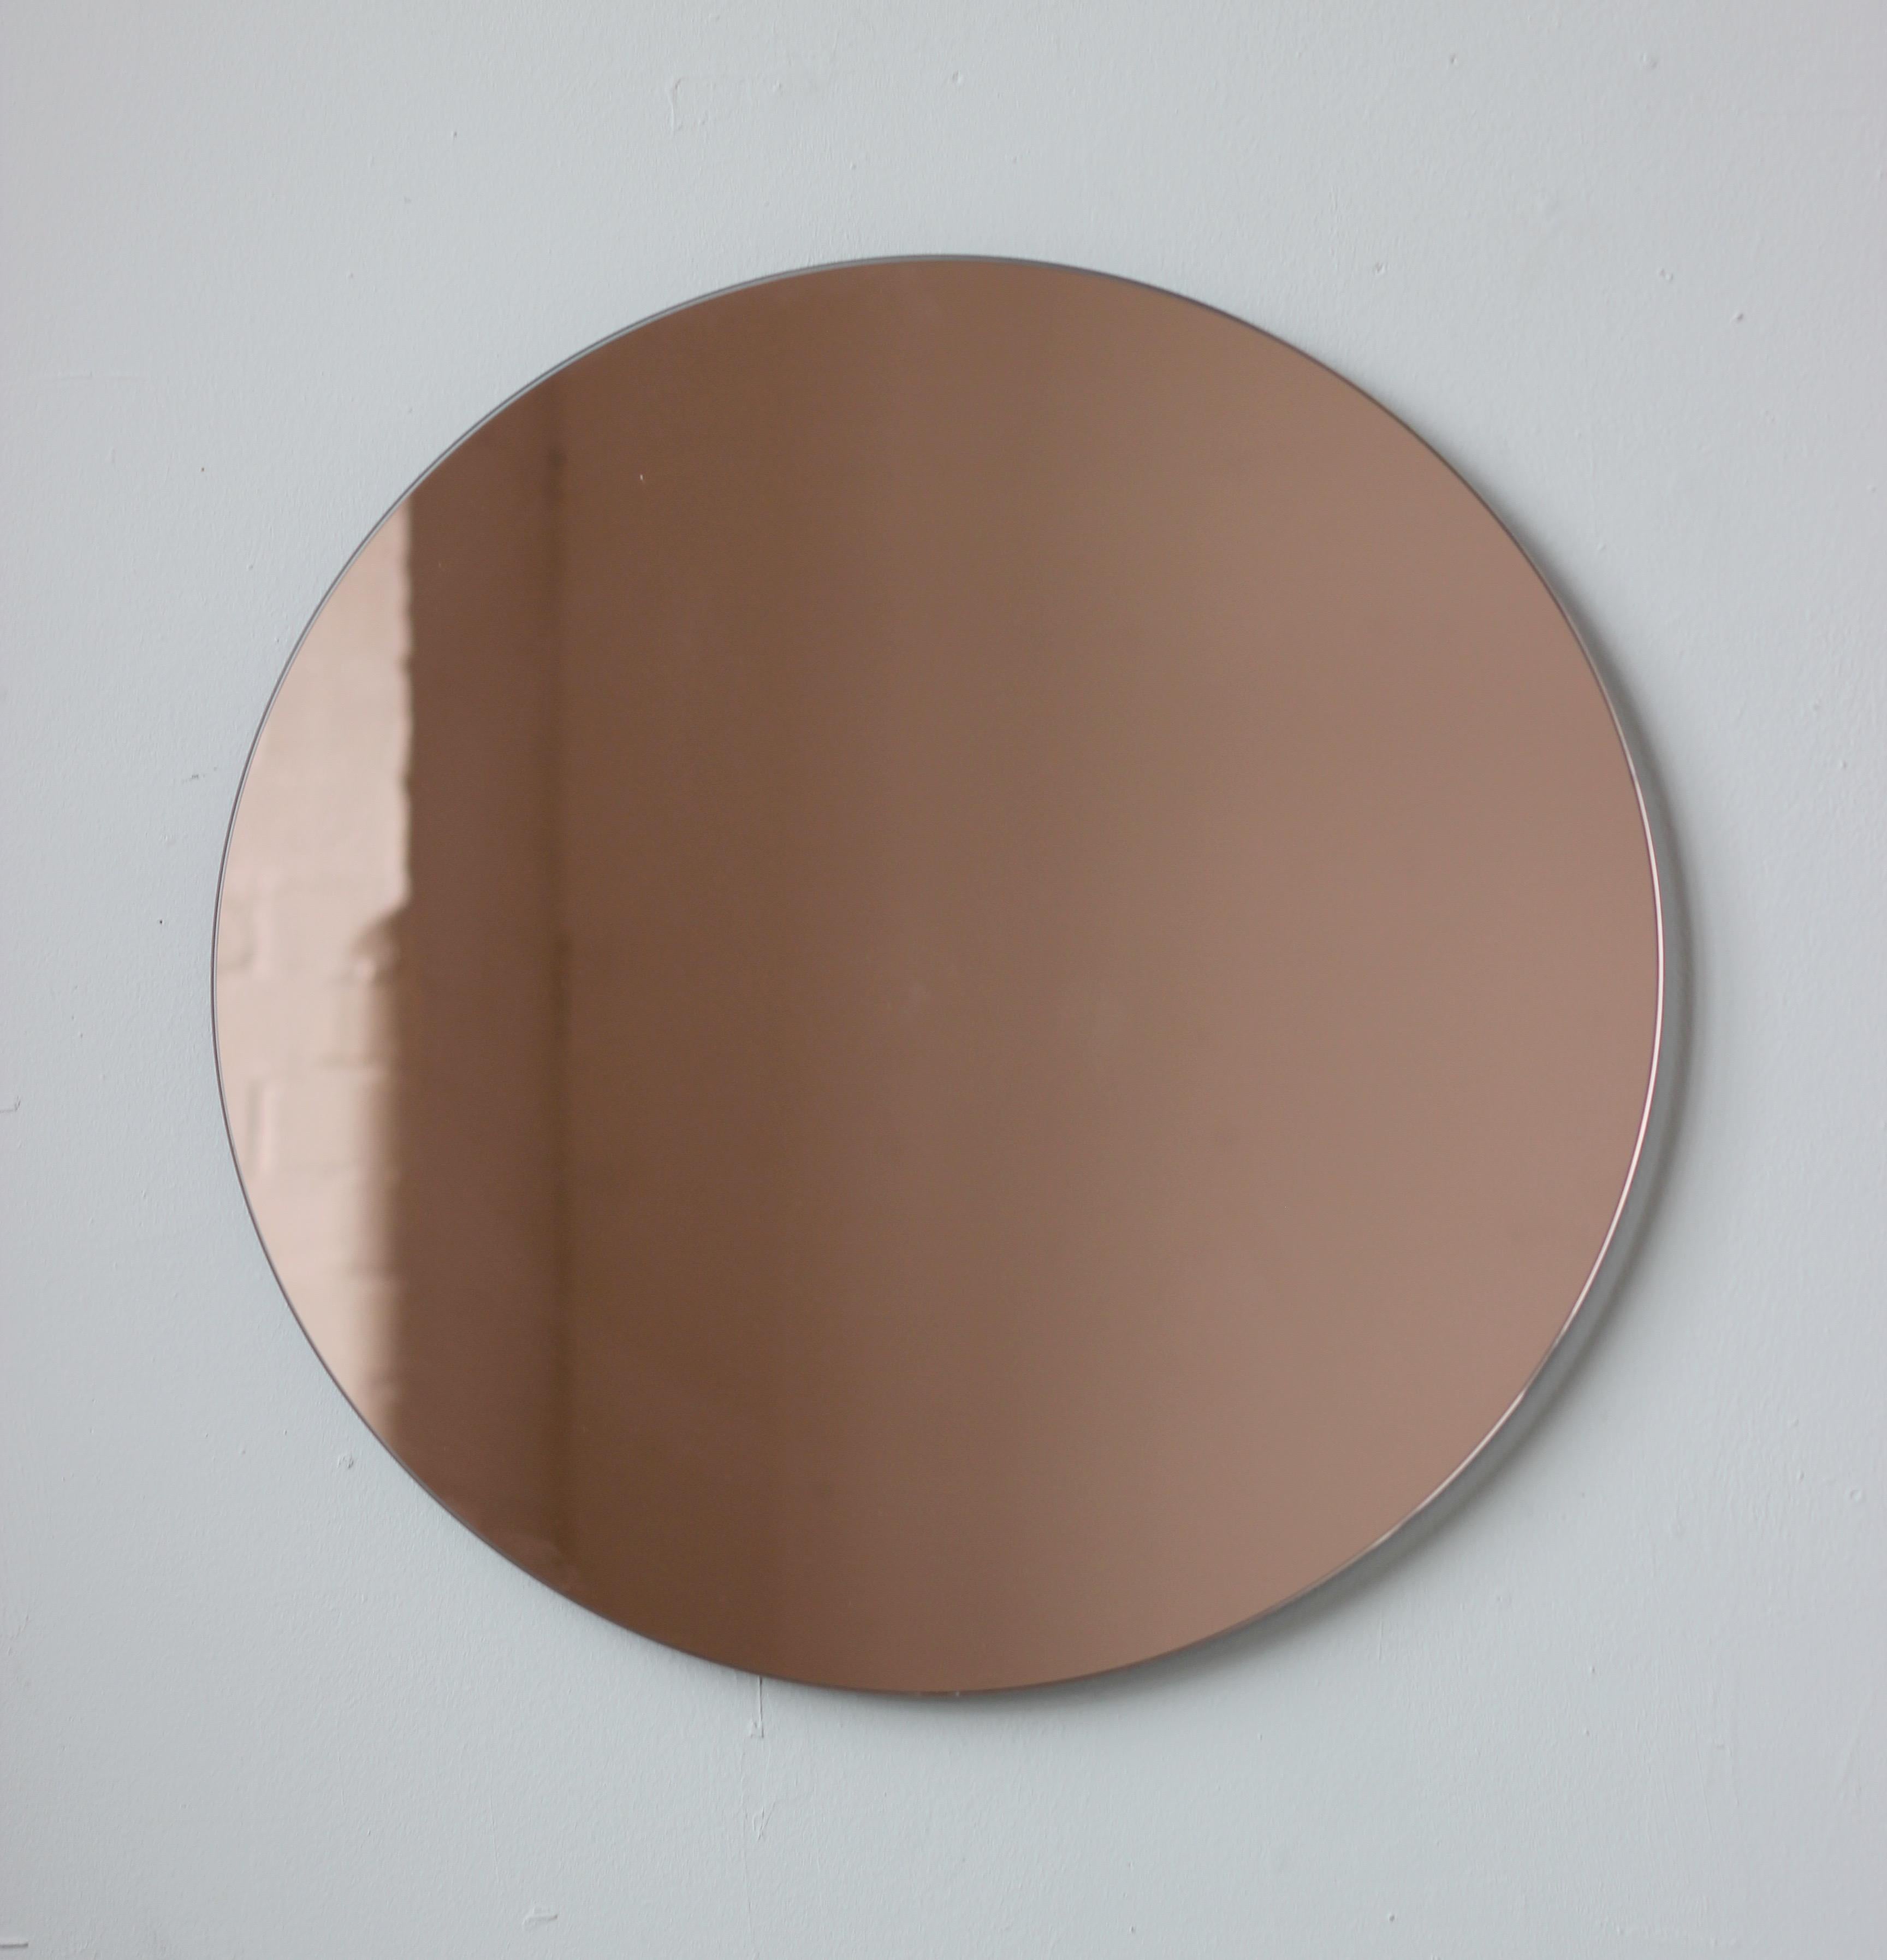 Charming and minimalist rose gold / peach tinted round frameless mirror with a floating effect. Quality design that ensures the mirror sits perfectly parallel to the wall. Designed and made in London, UK.

Fitted with professional plates not visible